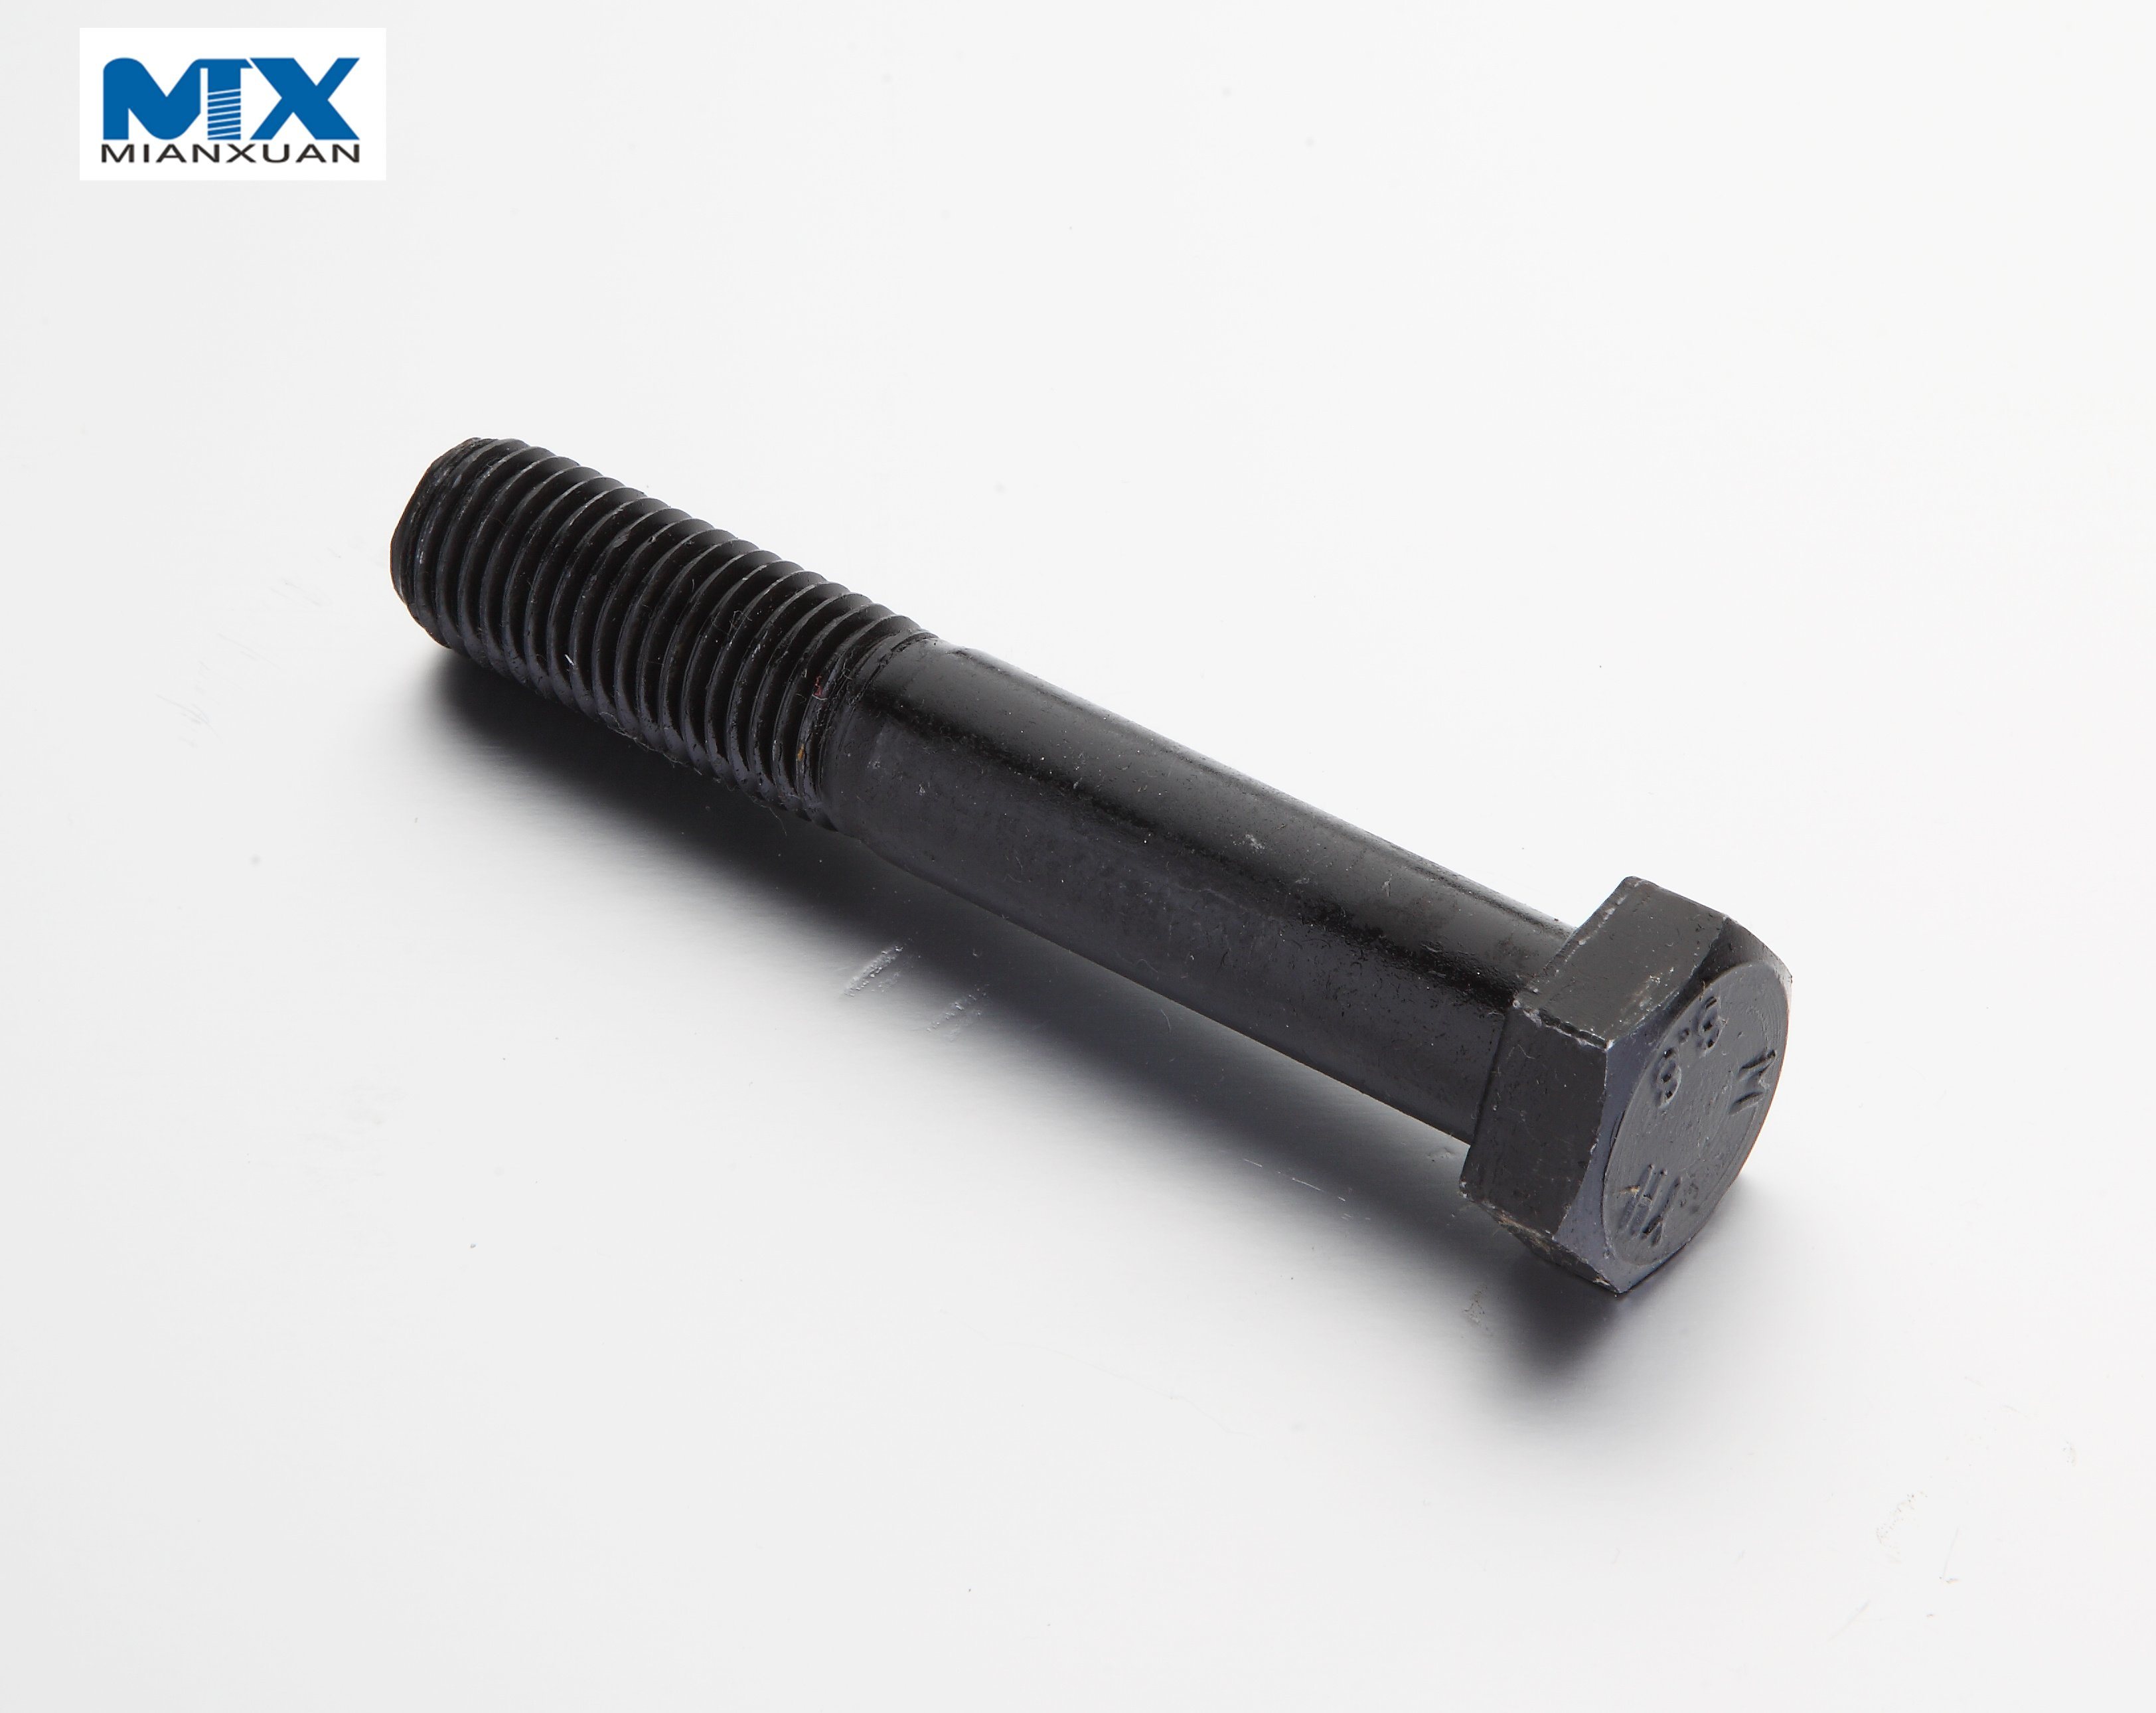 M5 to M52 Hexagon Head Bolts— Product Grade C